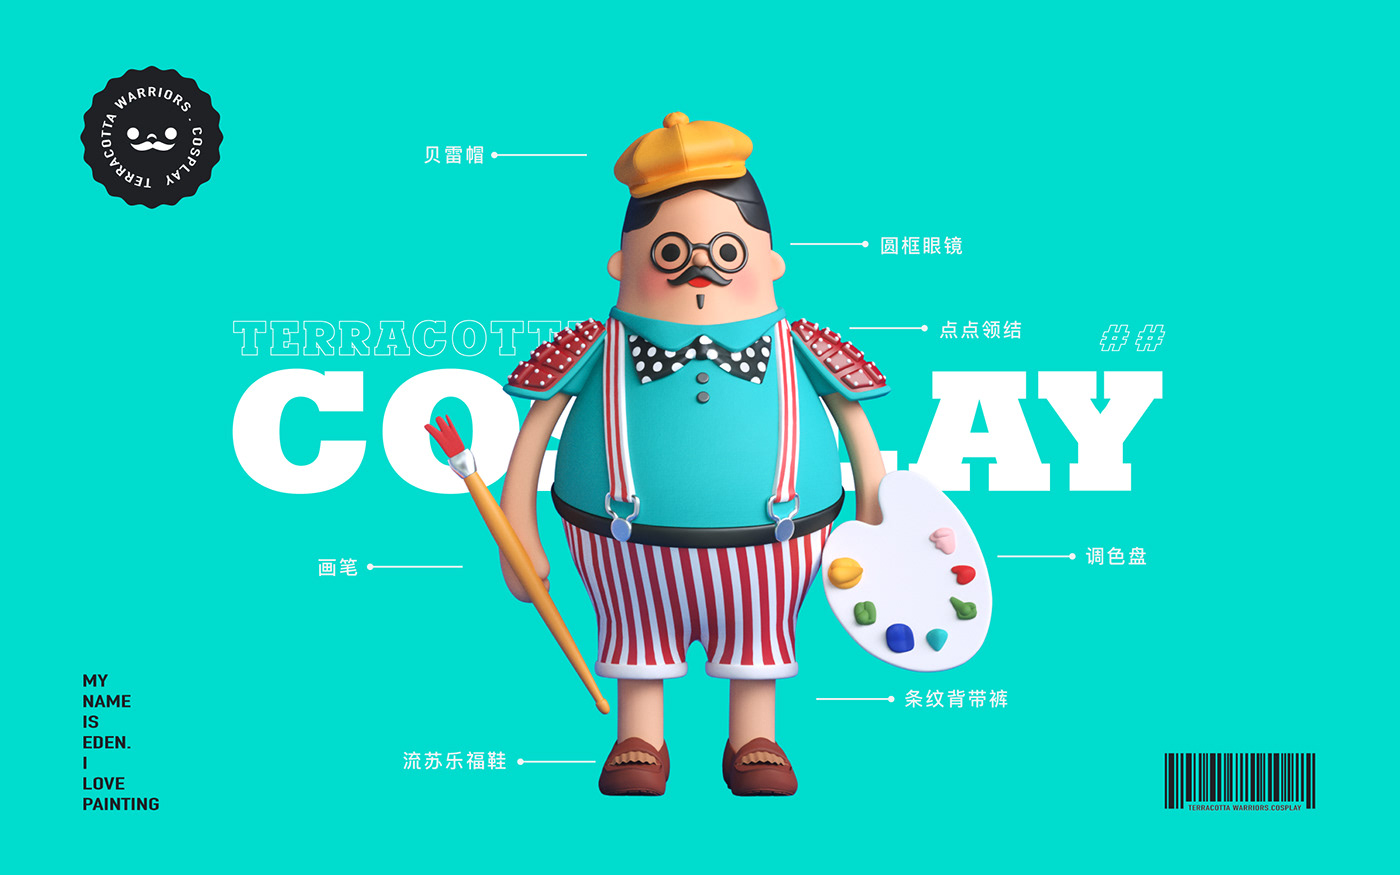 3D Advertising  animation  c4d Character graphic toy 公仔 兵馬俑 盲盒